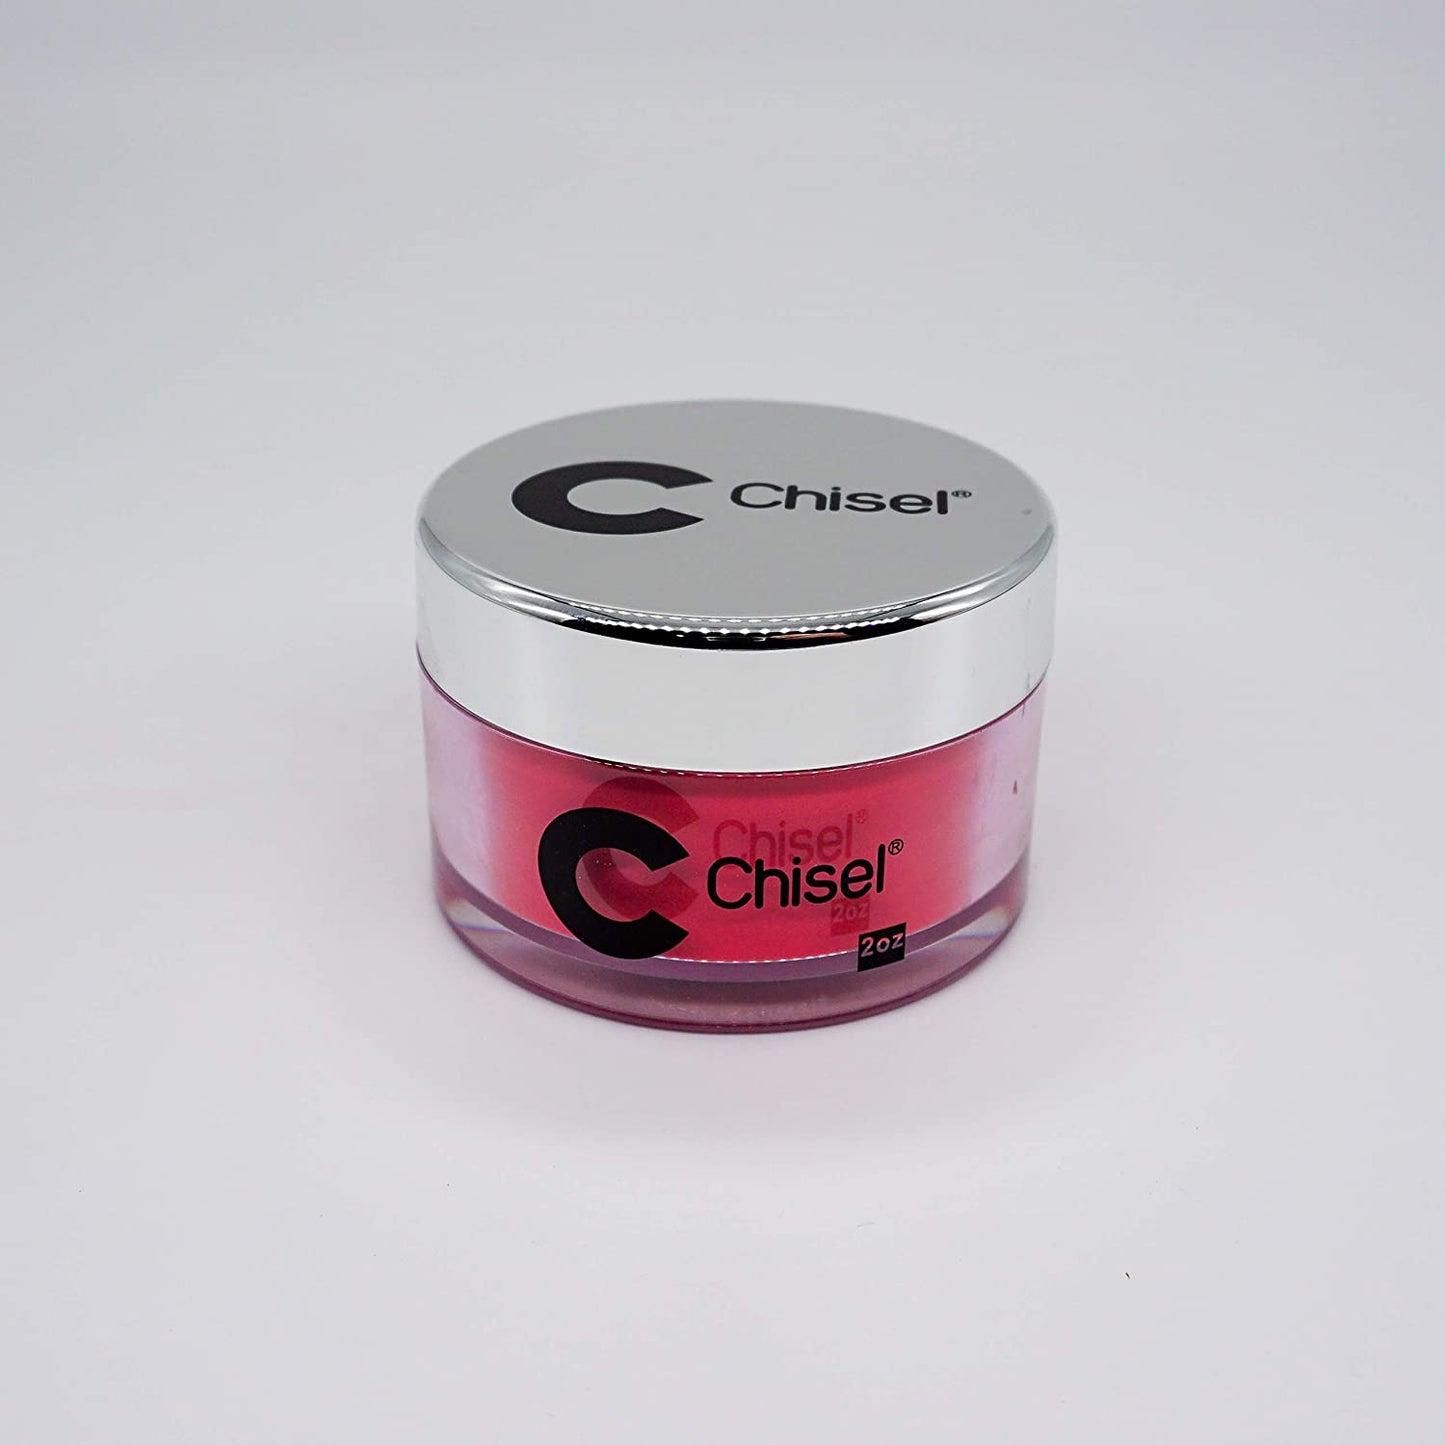 Chisel Nail Art 2 in 1 Acrylic & Dipping Powder Solid #016